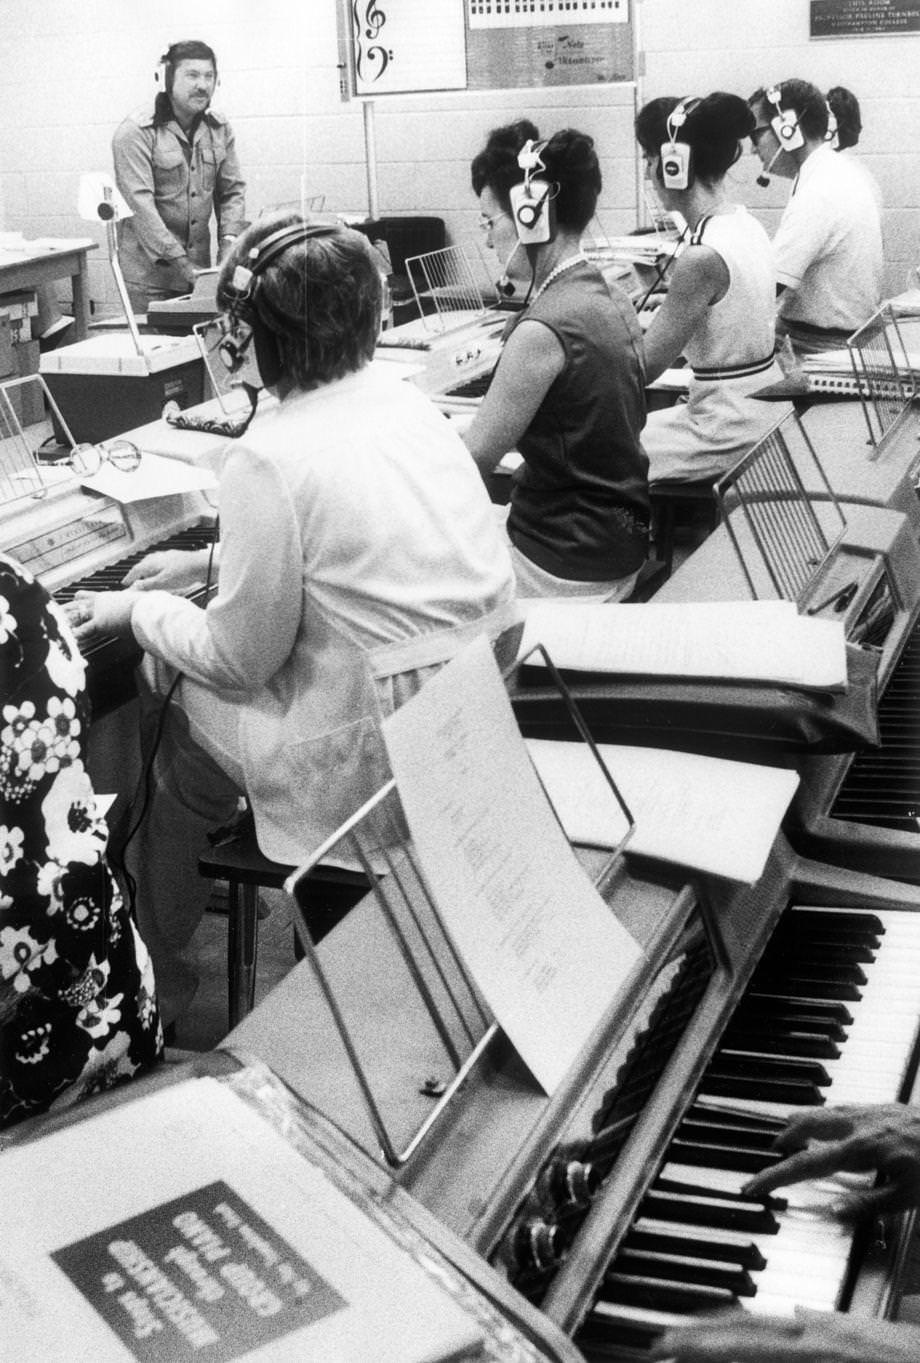 Larry Rast directed a group piano class at the University of Richmond, 1975.